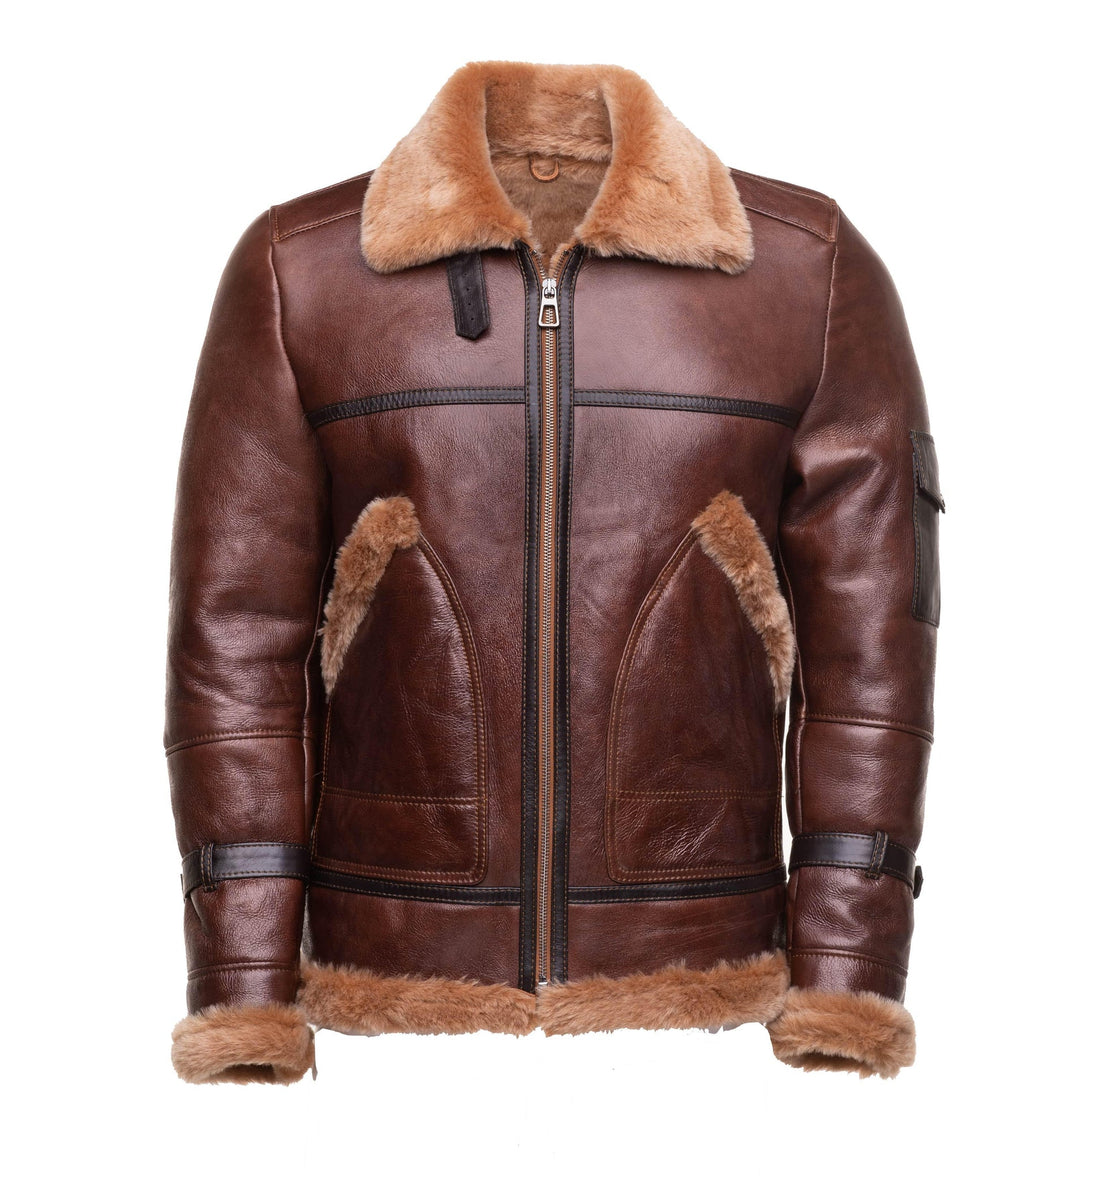 The Different Types of B3 Bomber Shearling Jackets